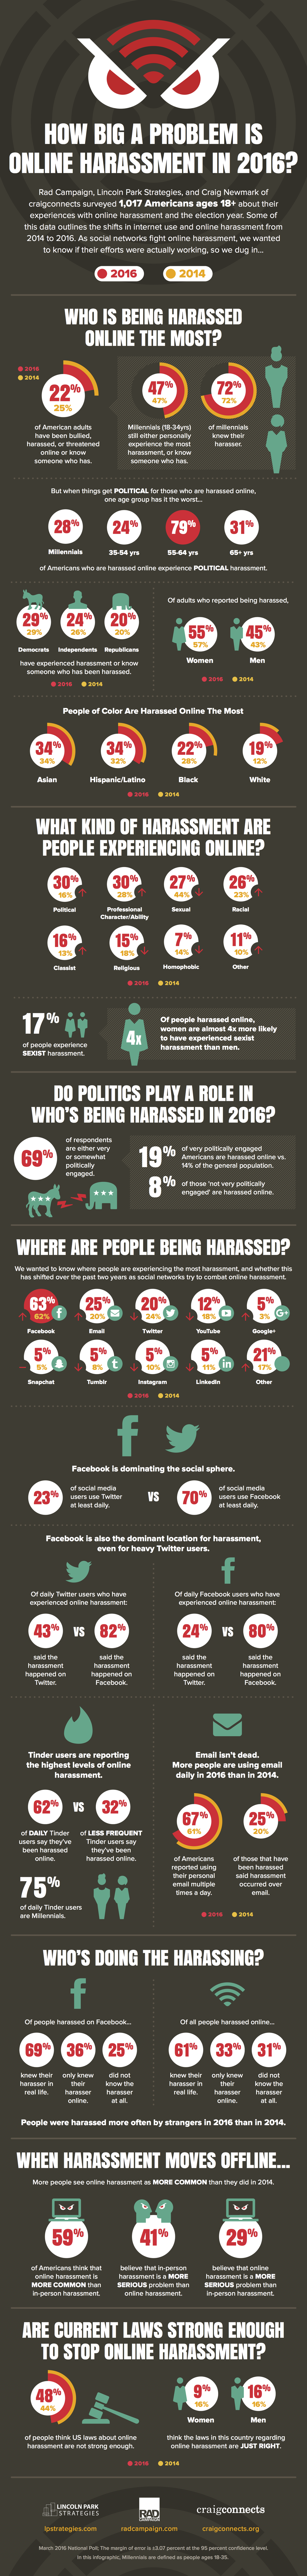 How Big a Problem is Online Harassment in 2016?